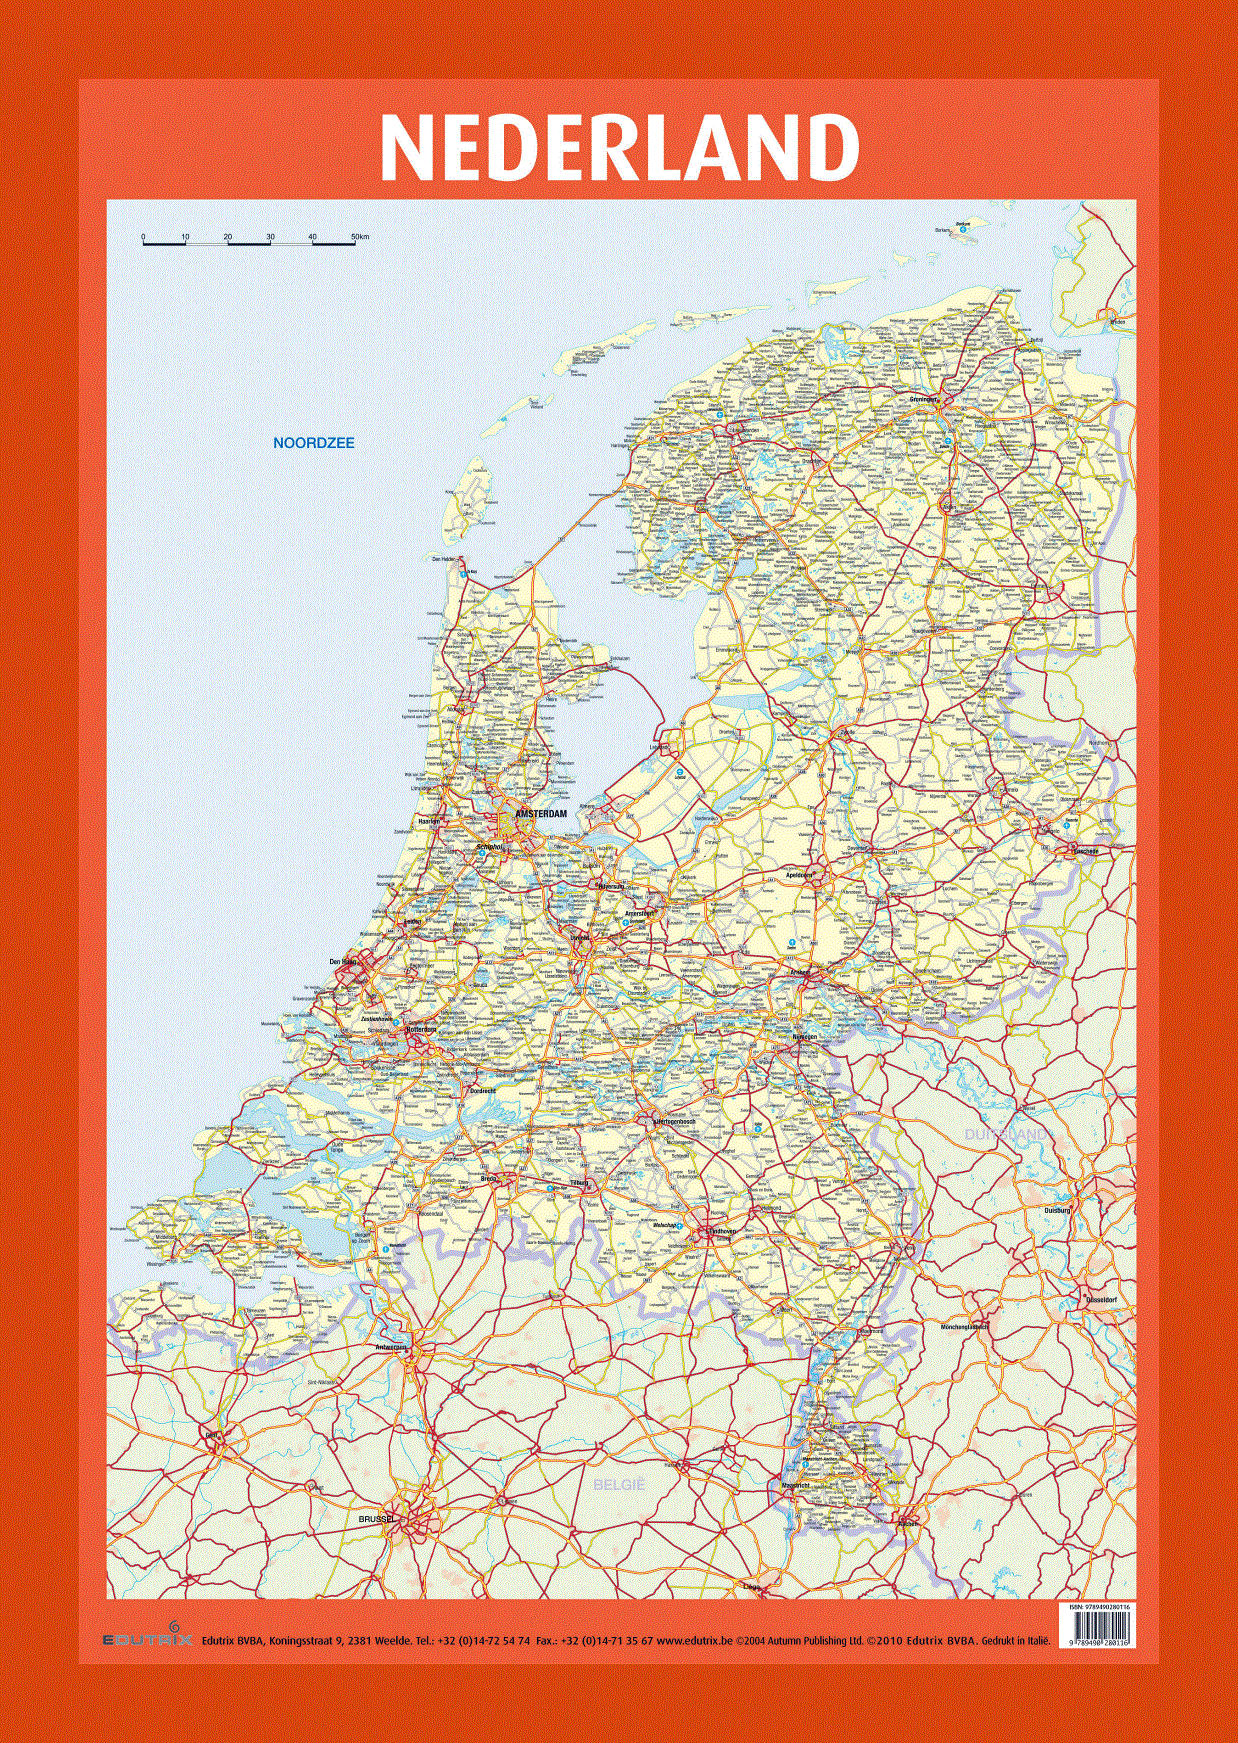 Road map of Netherlands